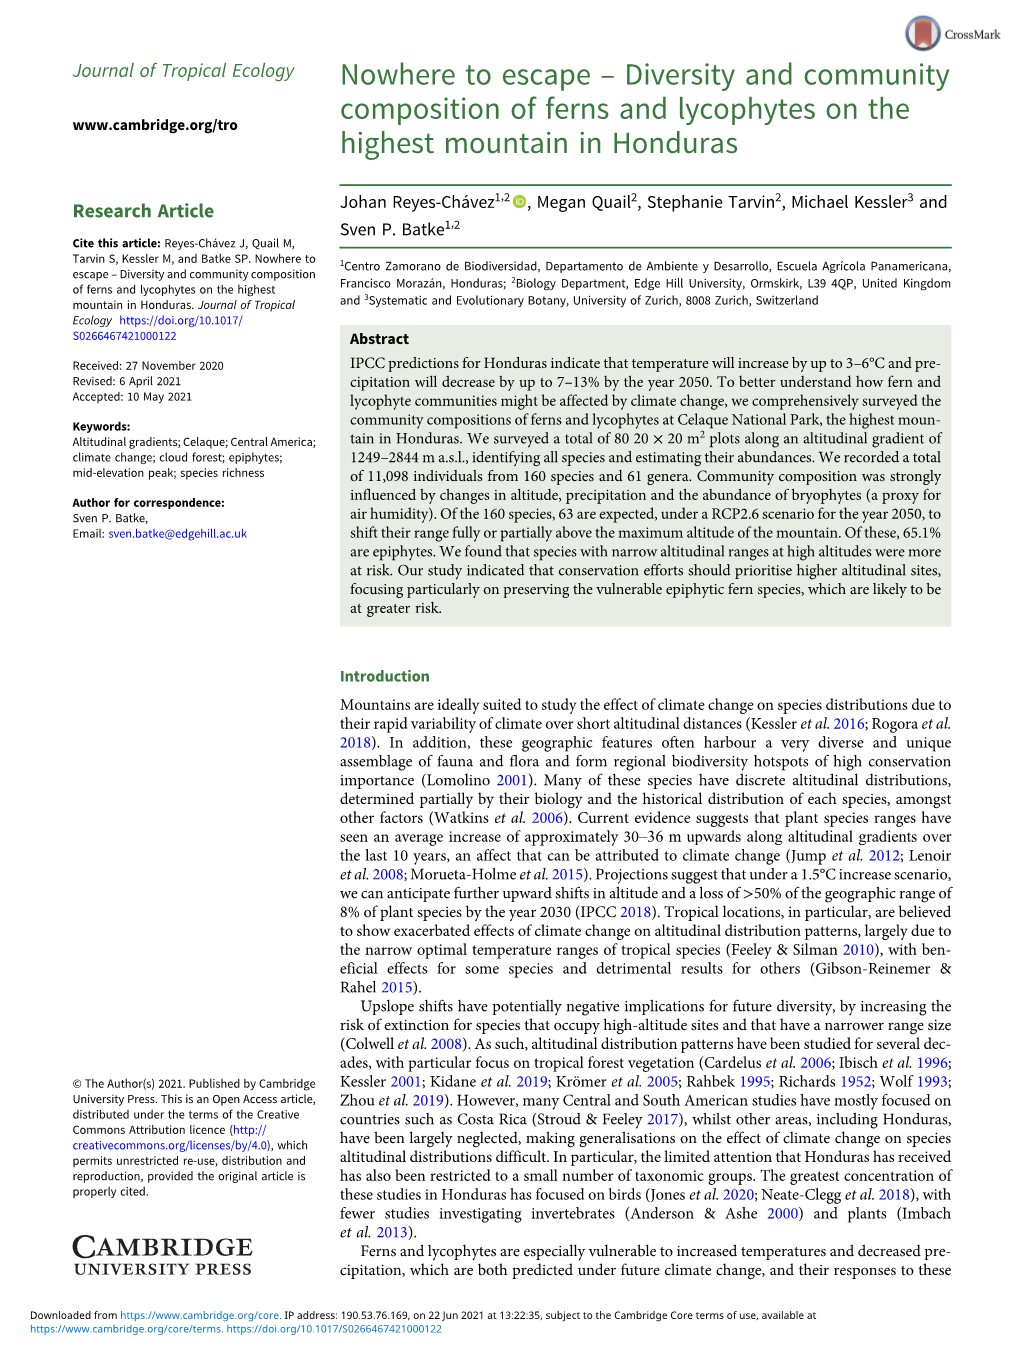 Diversity and Community Composition of Ferns and Lycophytes On